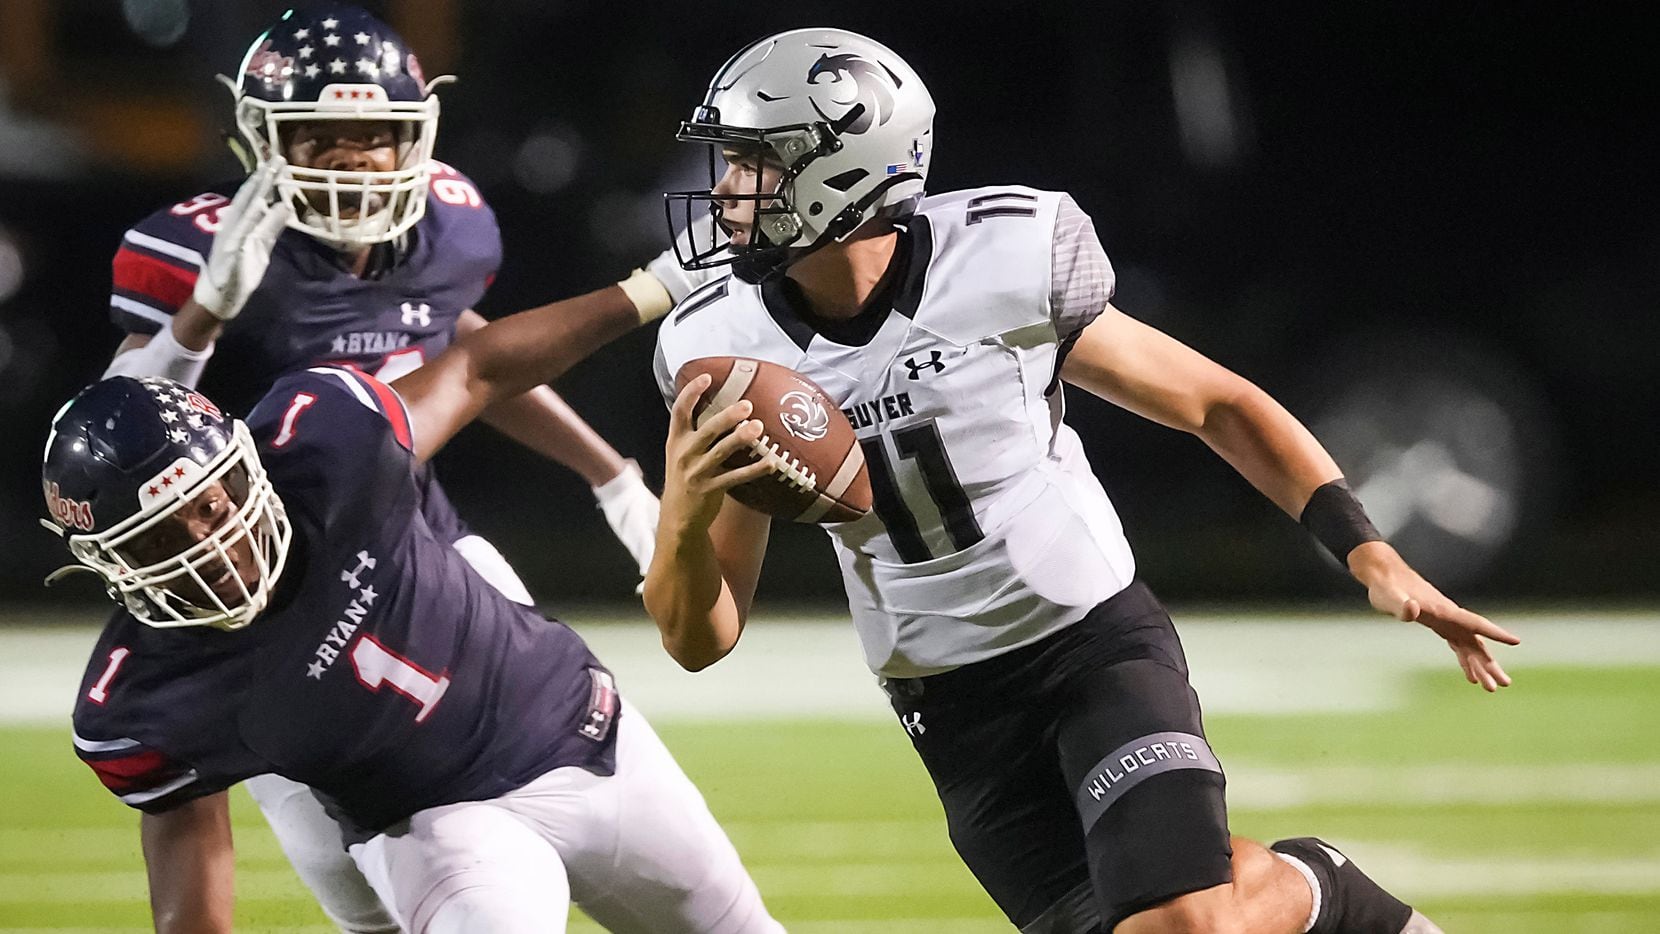 Denton Guyer quarterback Jackson Arnold (11) scrambles away from Denton Ryan defensive lineman MarQuice Hill (1) during the second half of a high school football game on Friday, Sept. 3, 2021, in Denton. Guyer won the game 14-7 in overtime. (Smiley N. Pool/The Dallas Morning News)